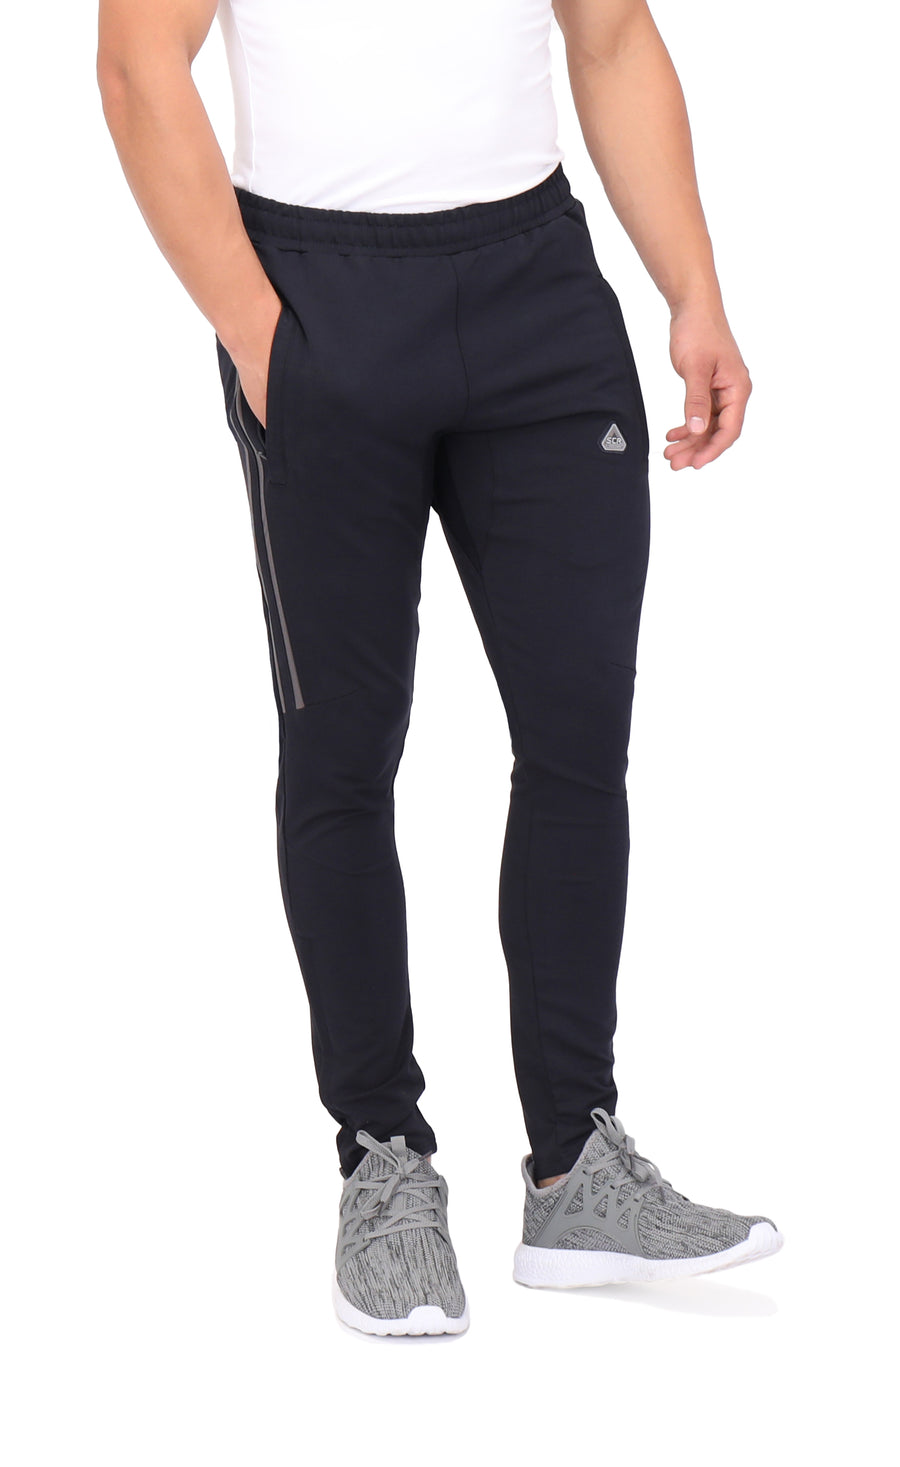 SCR Sportswear - Introducing new SCR Sportswear athletic pants. Now  available in 30, 33 and 36 Inseam. Use code 10SCRPANTS to save extra  10%. (starting today @8pm)Please share.  SPORTSWEAR-Training-Athletic-Sweatpants/dp